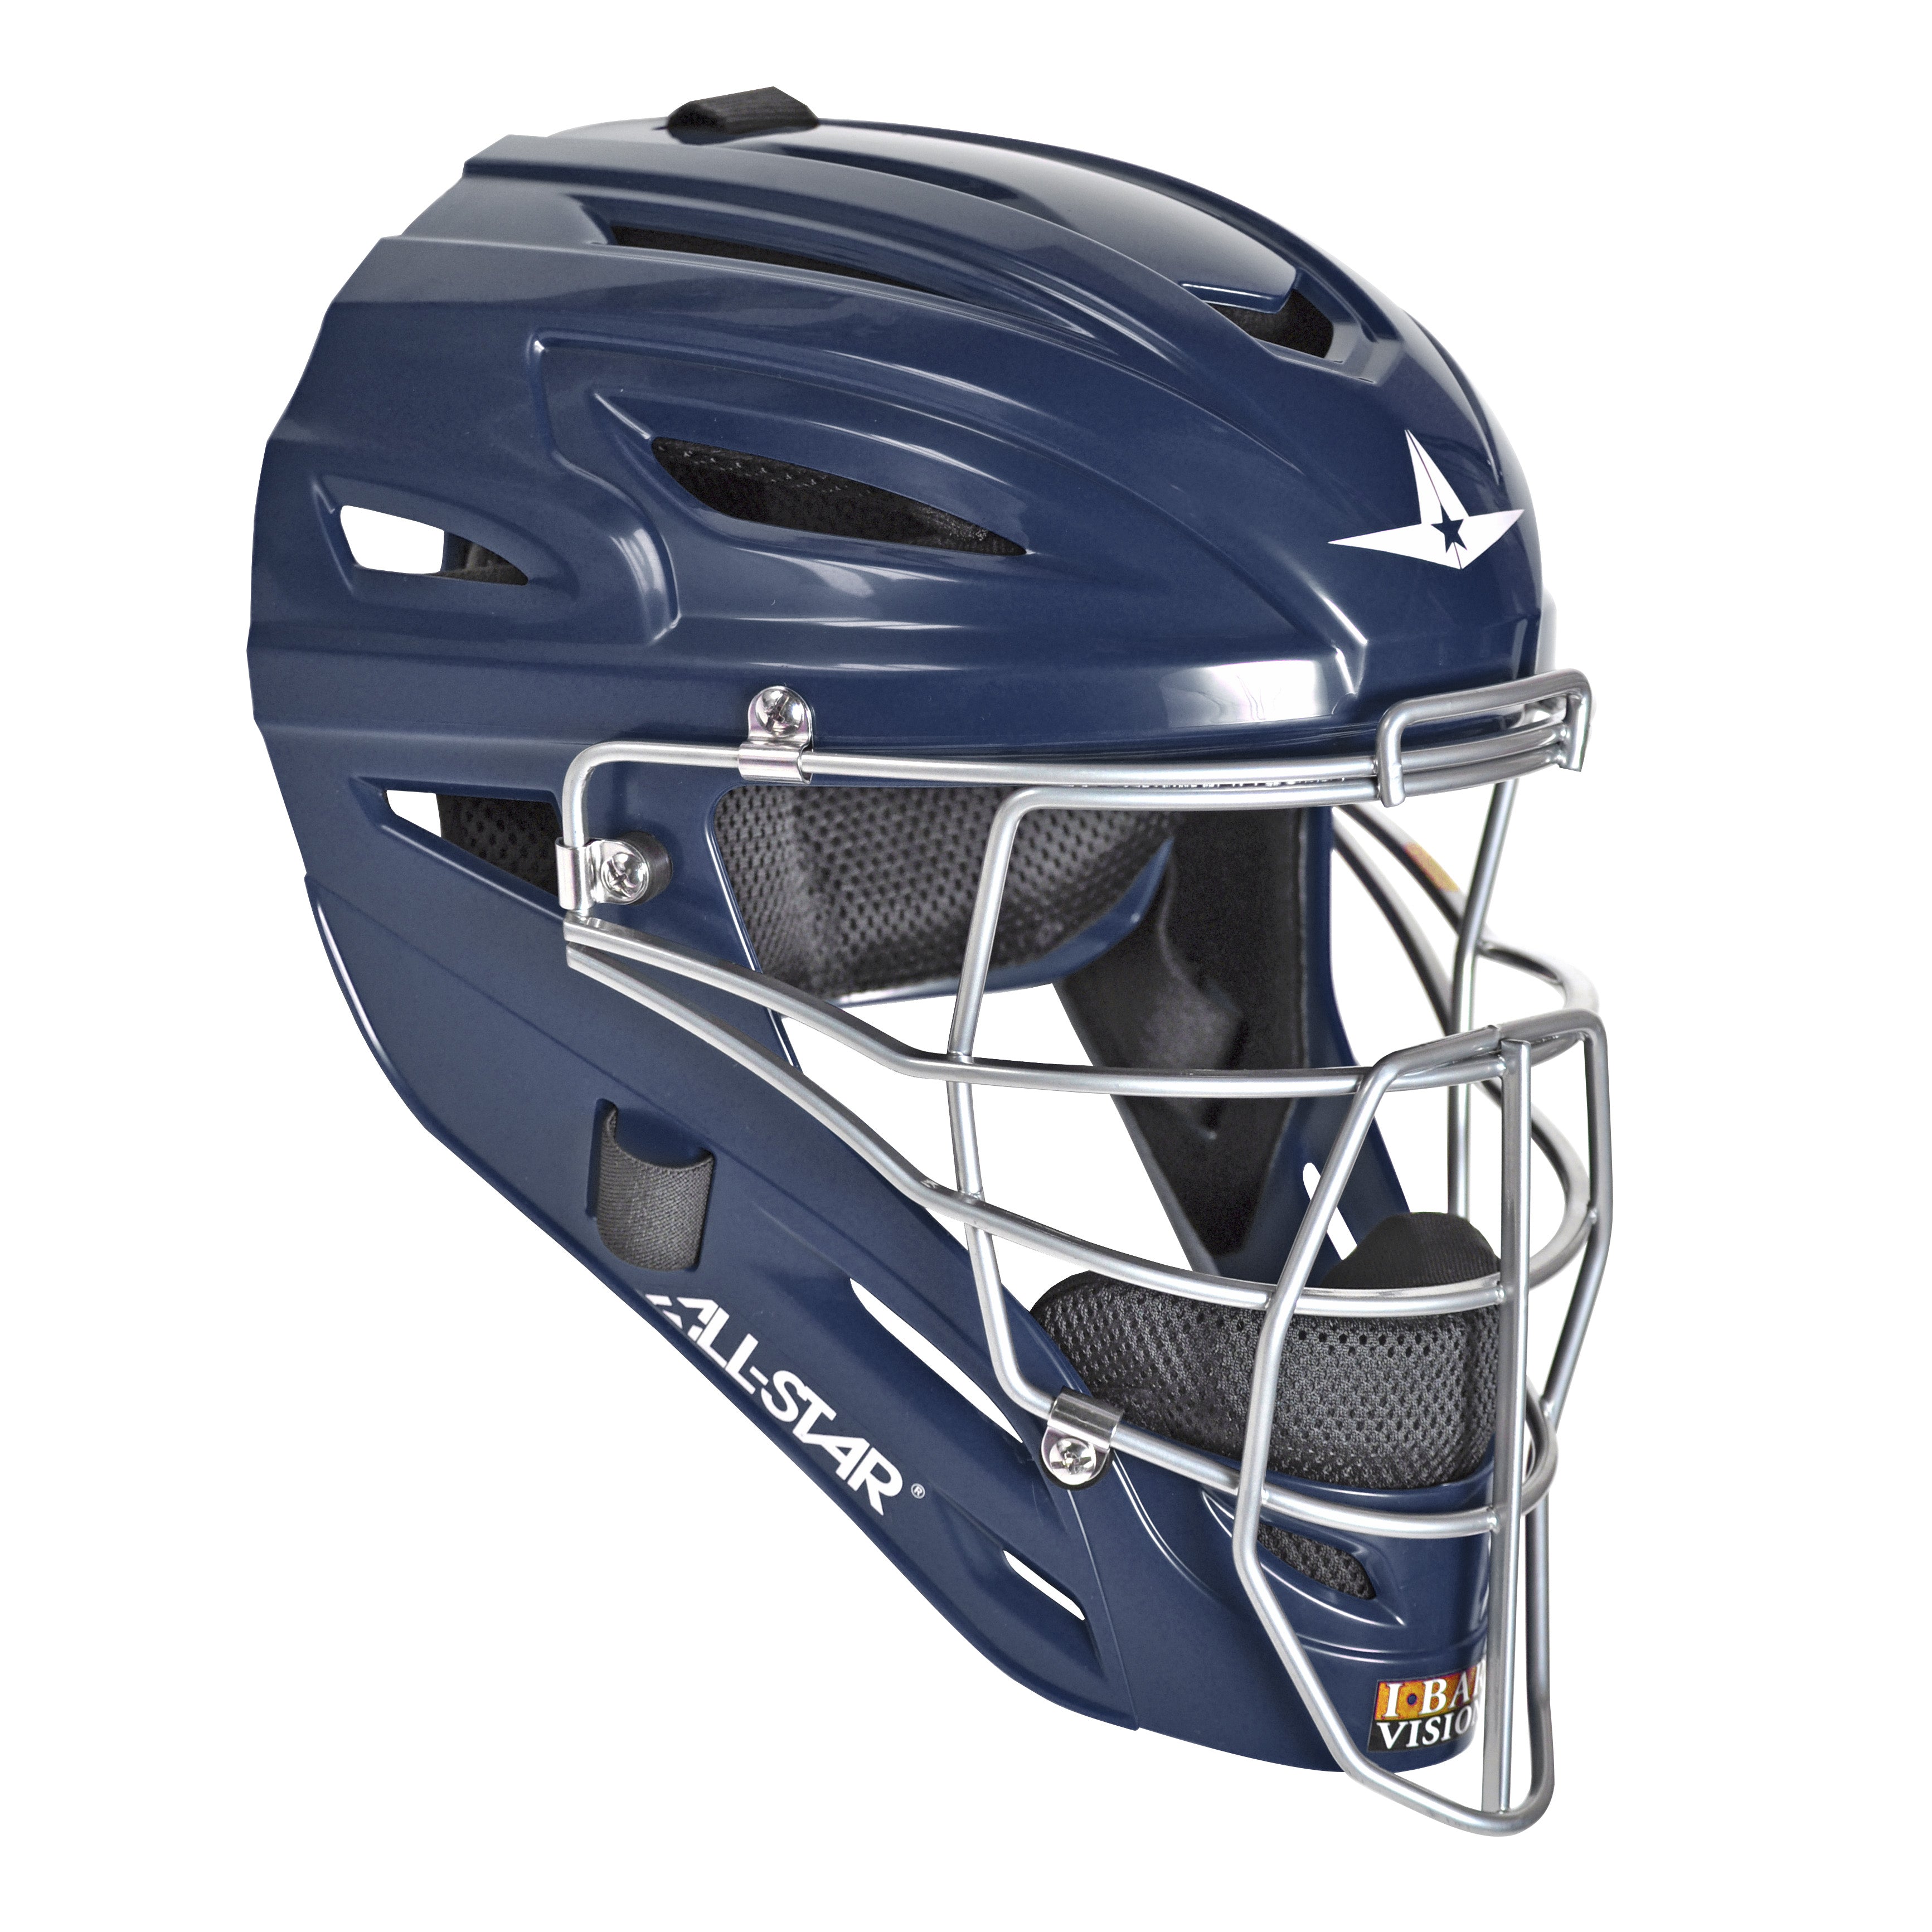 All-Star S7 AXIS Helmet / Ages 9-12